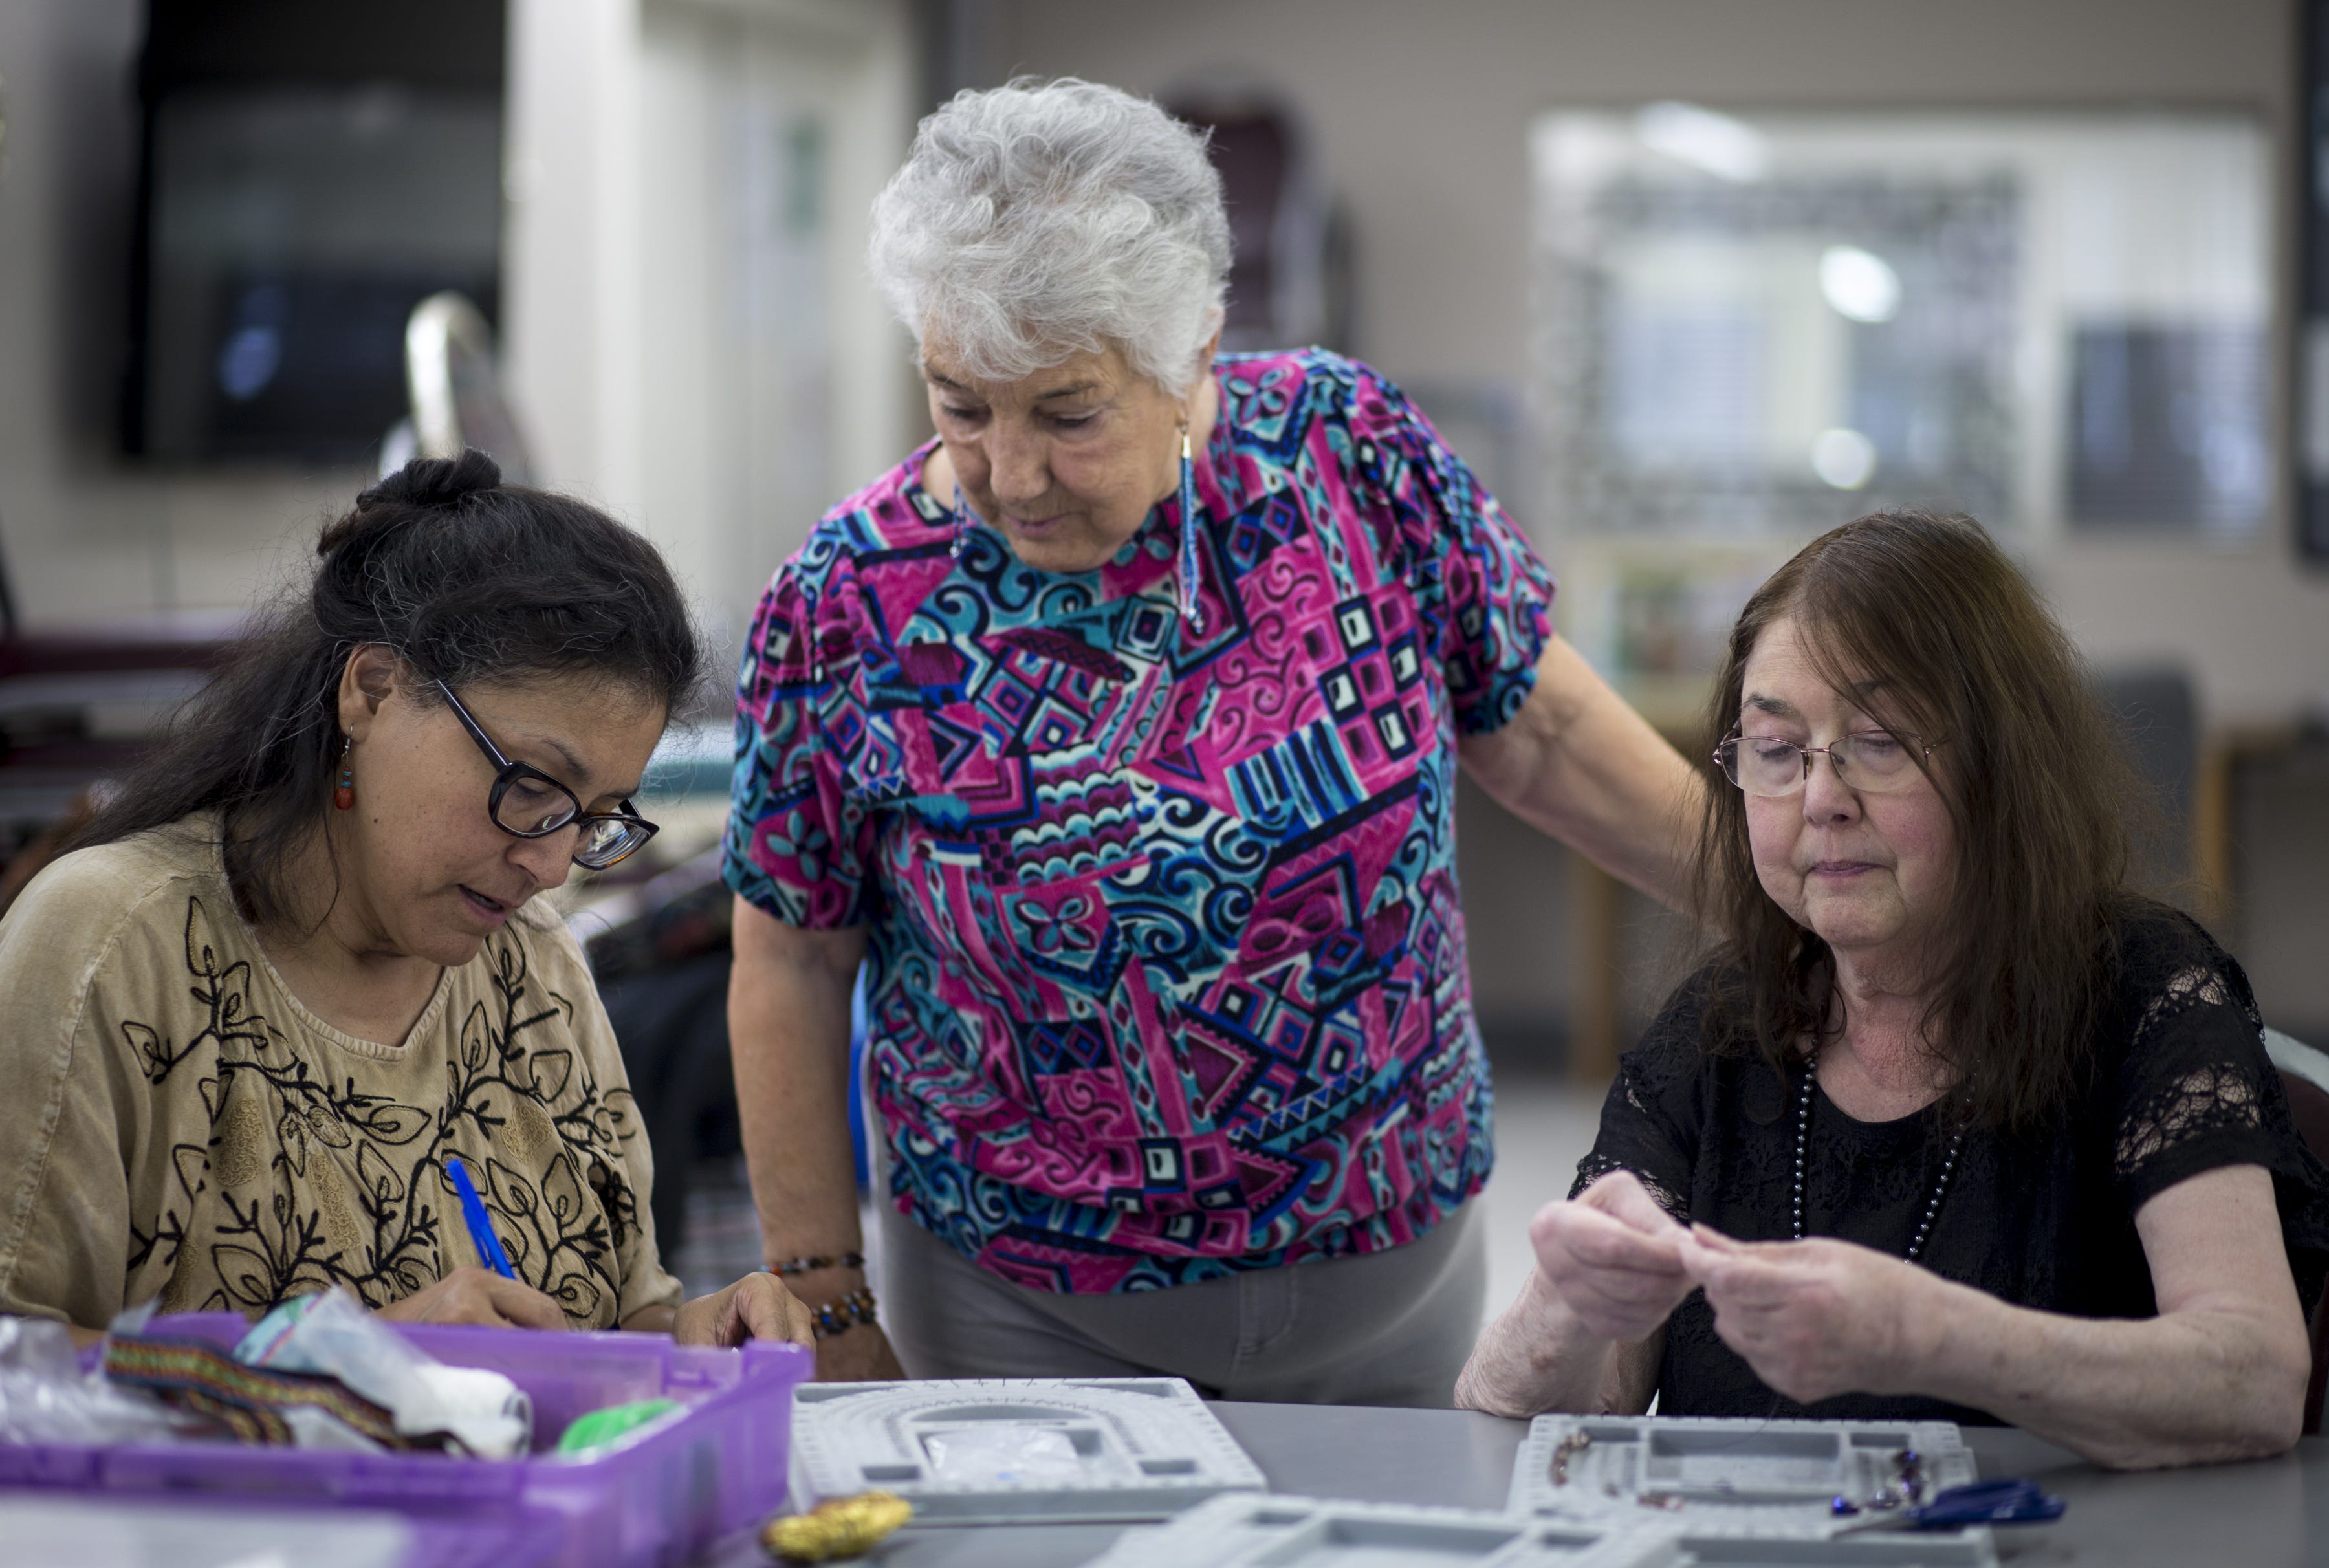 Barbara Cory (right) and Cynthia Fodness make jewelry, Dec. 12, 2018 at Phoenix Senior Opportunities, 1220 S. Seventh Ave. in Phoenix. Looking on is their instructor, Fina Gaffney (center). Cory copes with asthma that can flare up when smog worsens in Phoenix’s winter months.